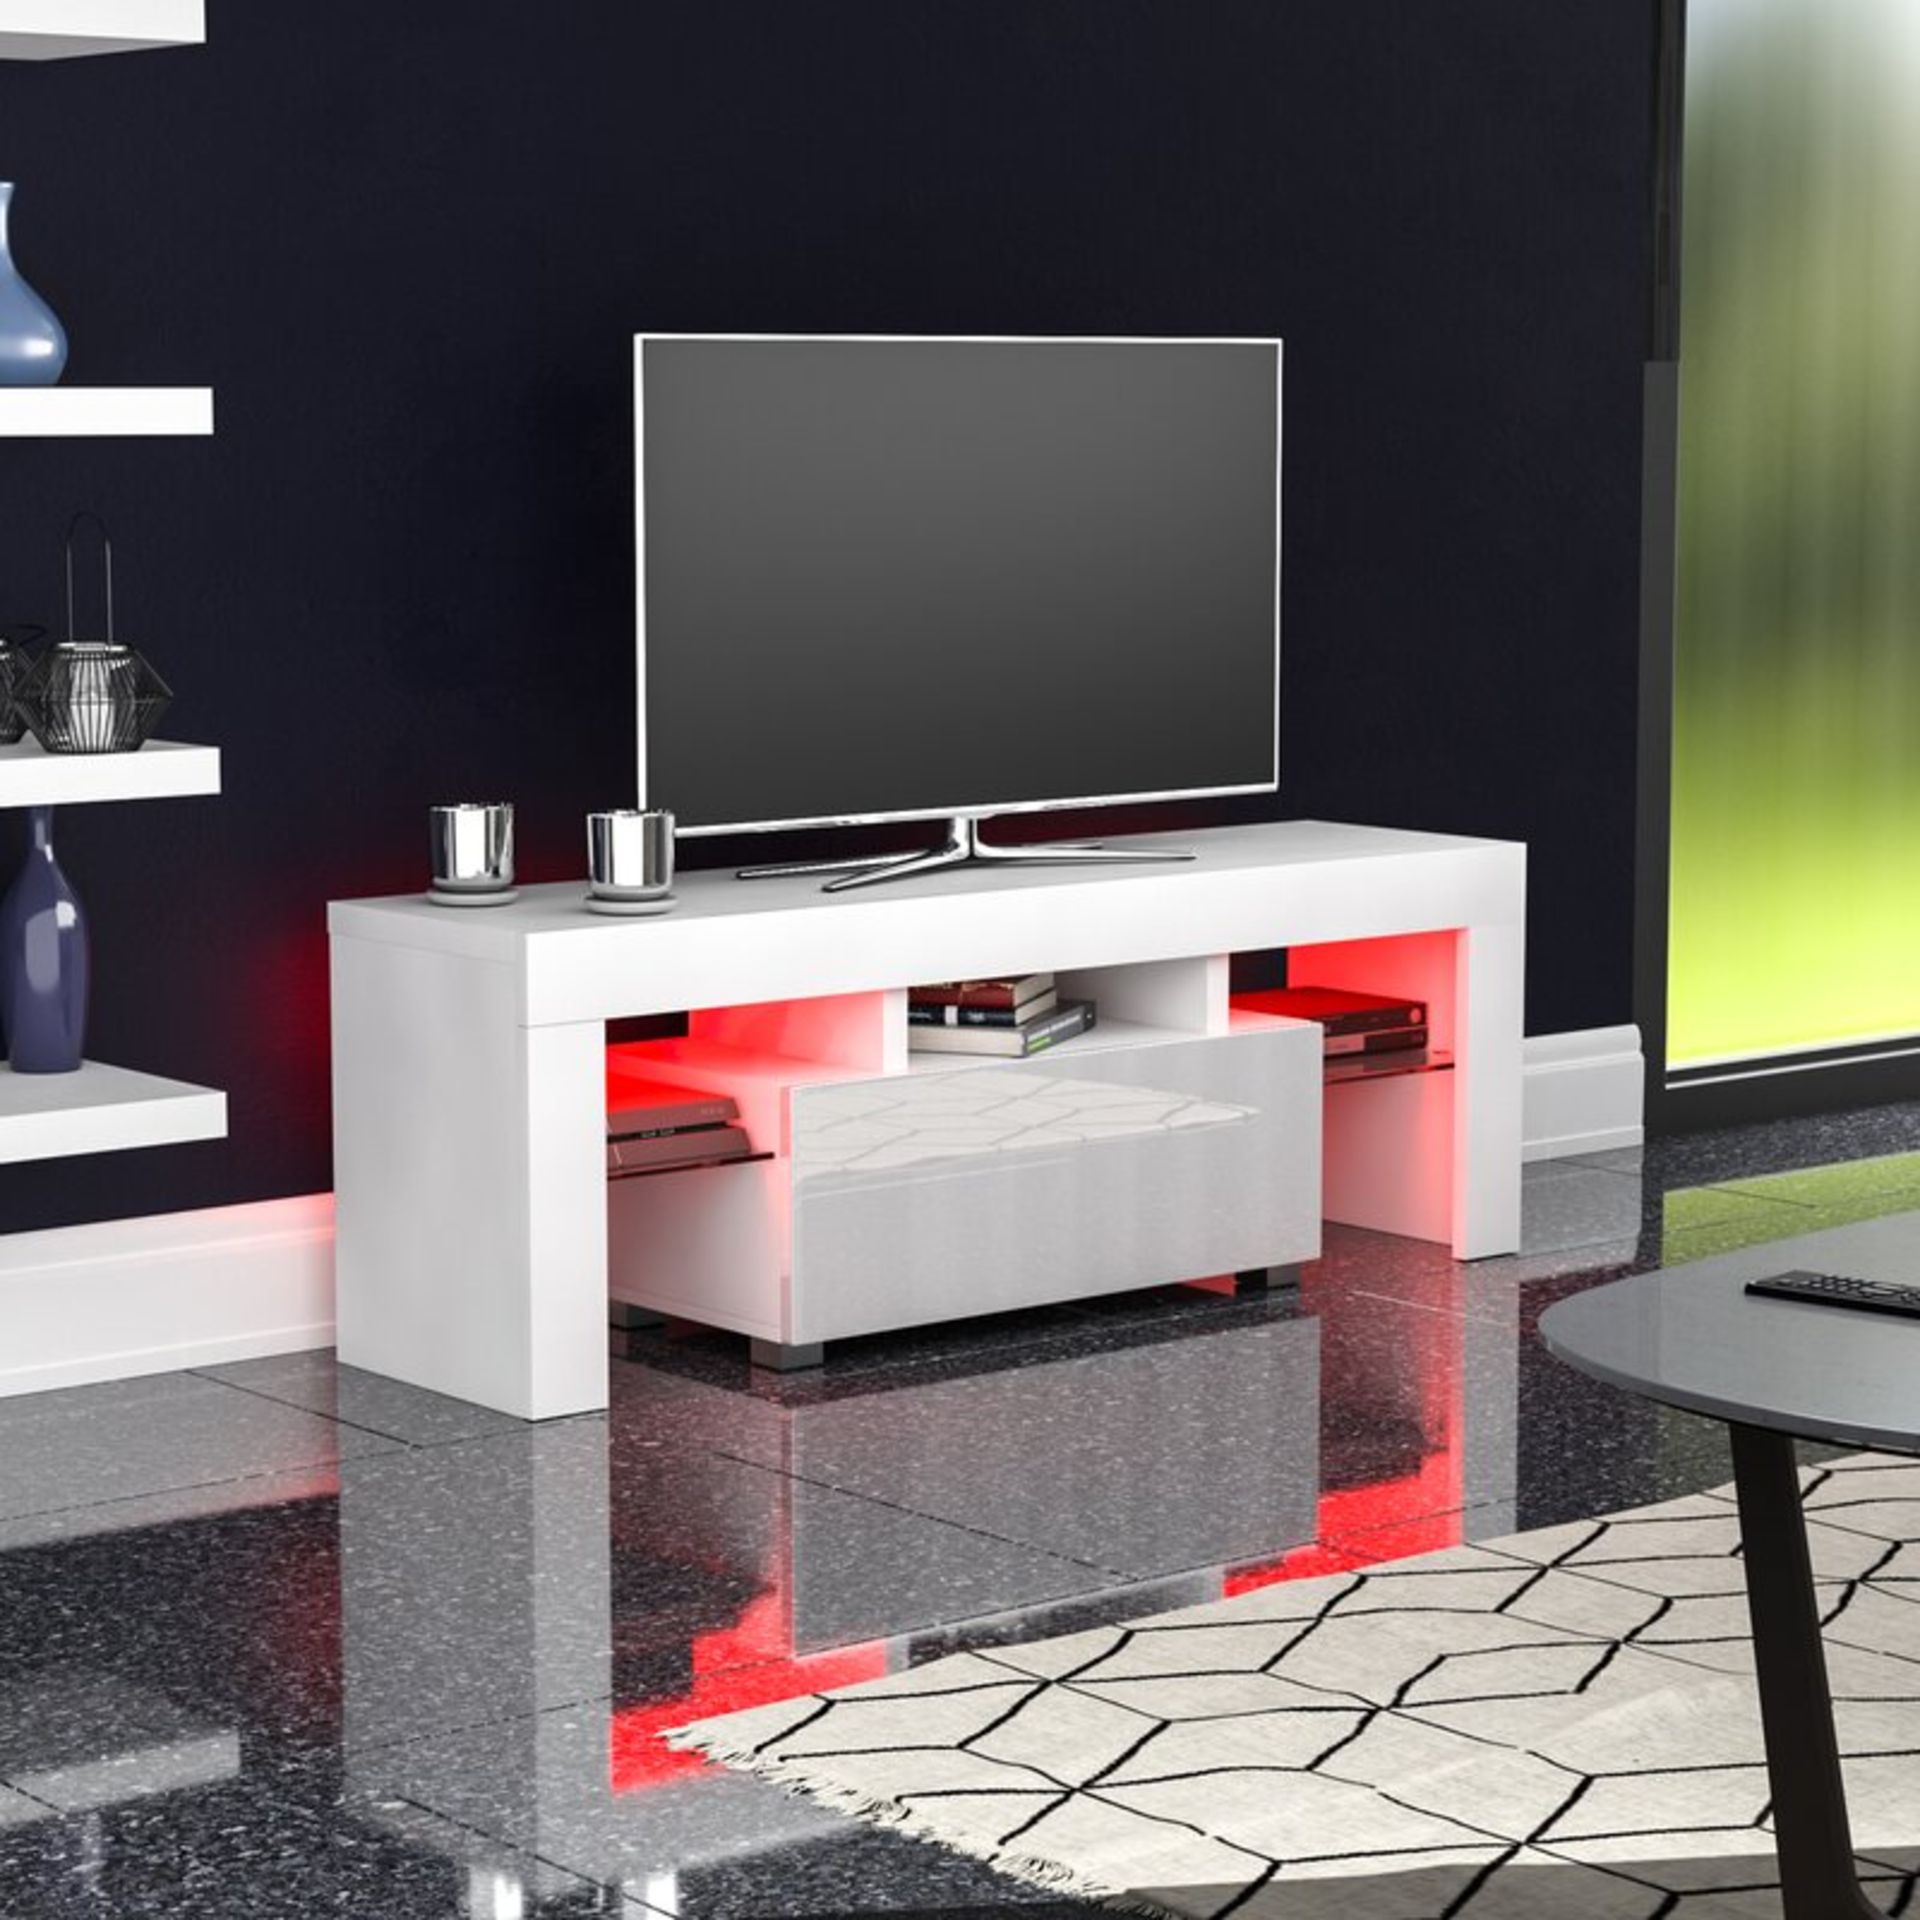 Blakely TV Stand for TVs up to 55" - RRP £98.99 - Image 2 of 2